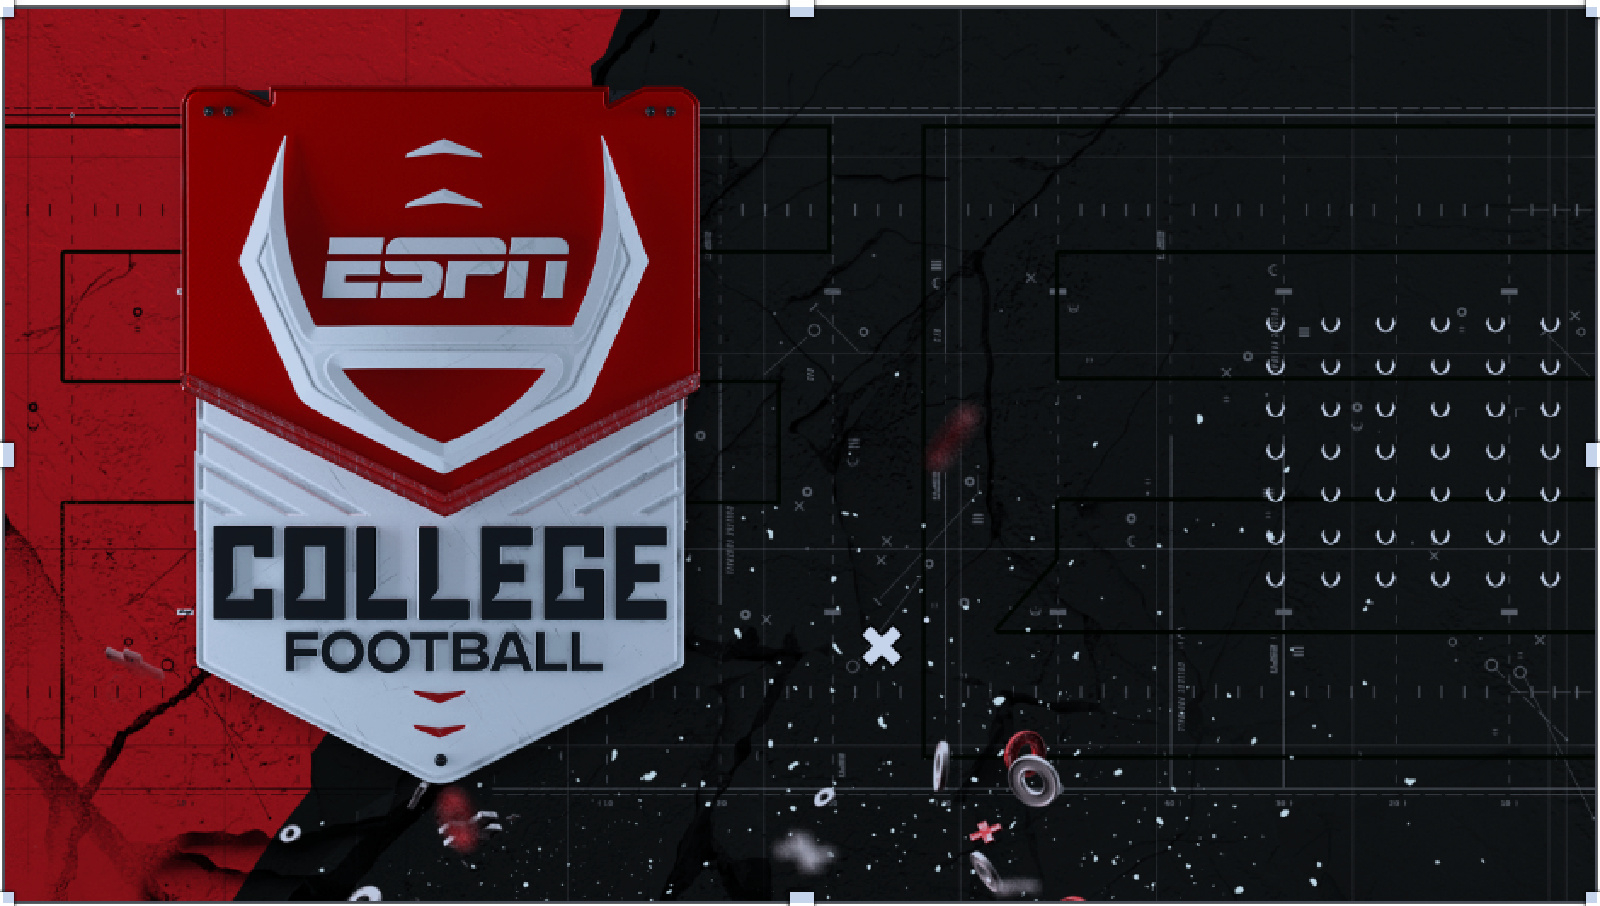 Counting Down to Kickoff A Tune-In Guide to the 2023 ESPN College Football Season